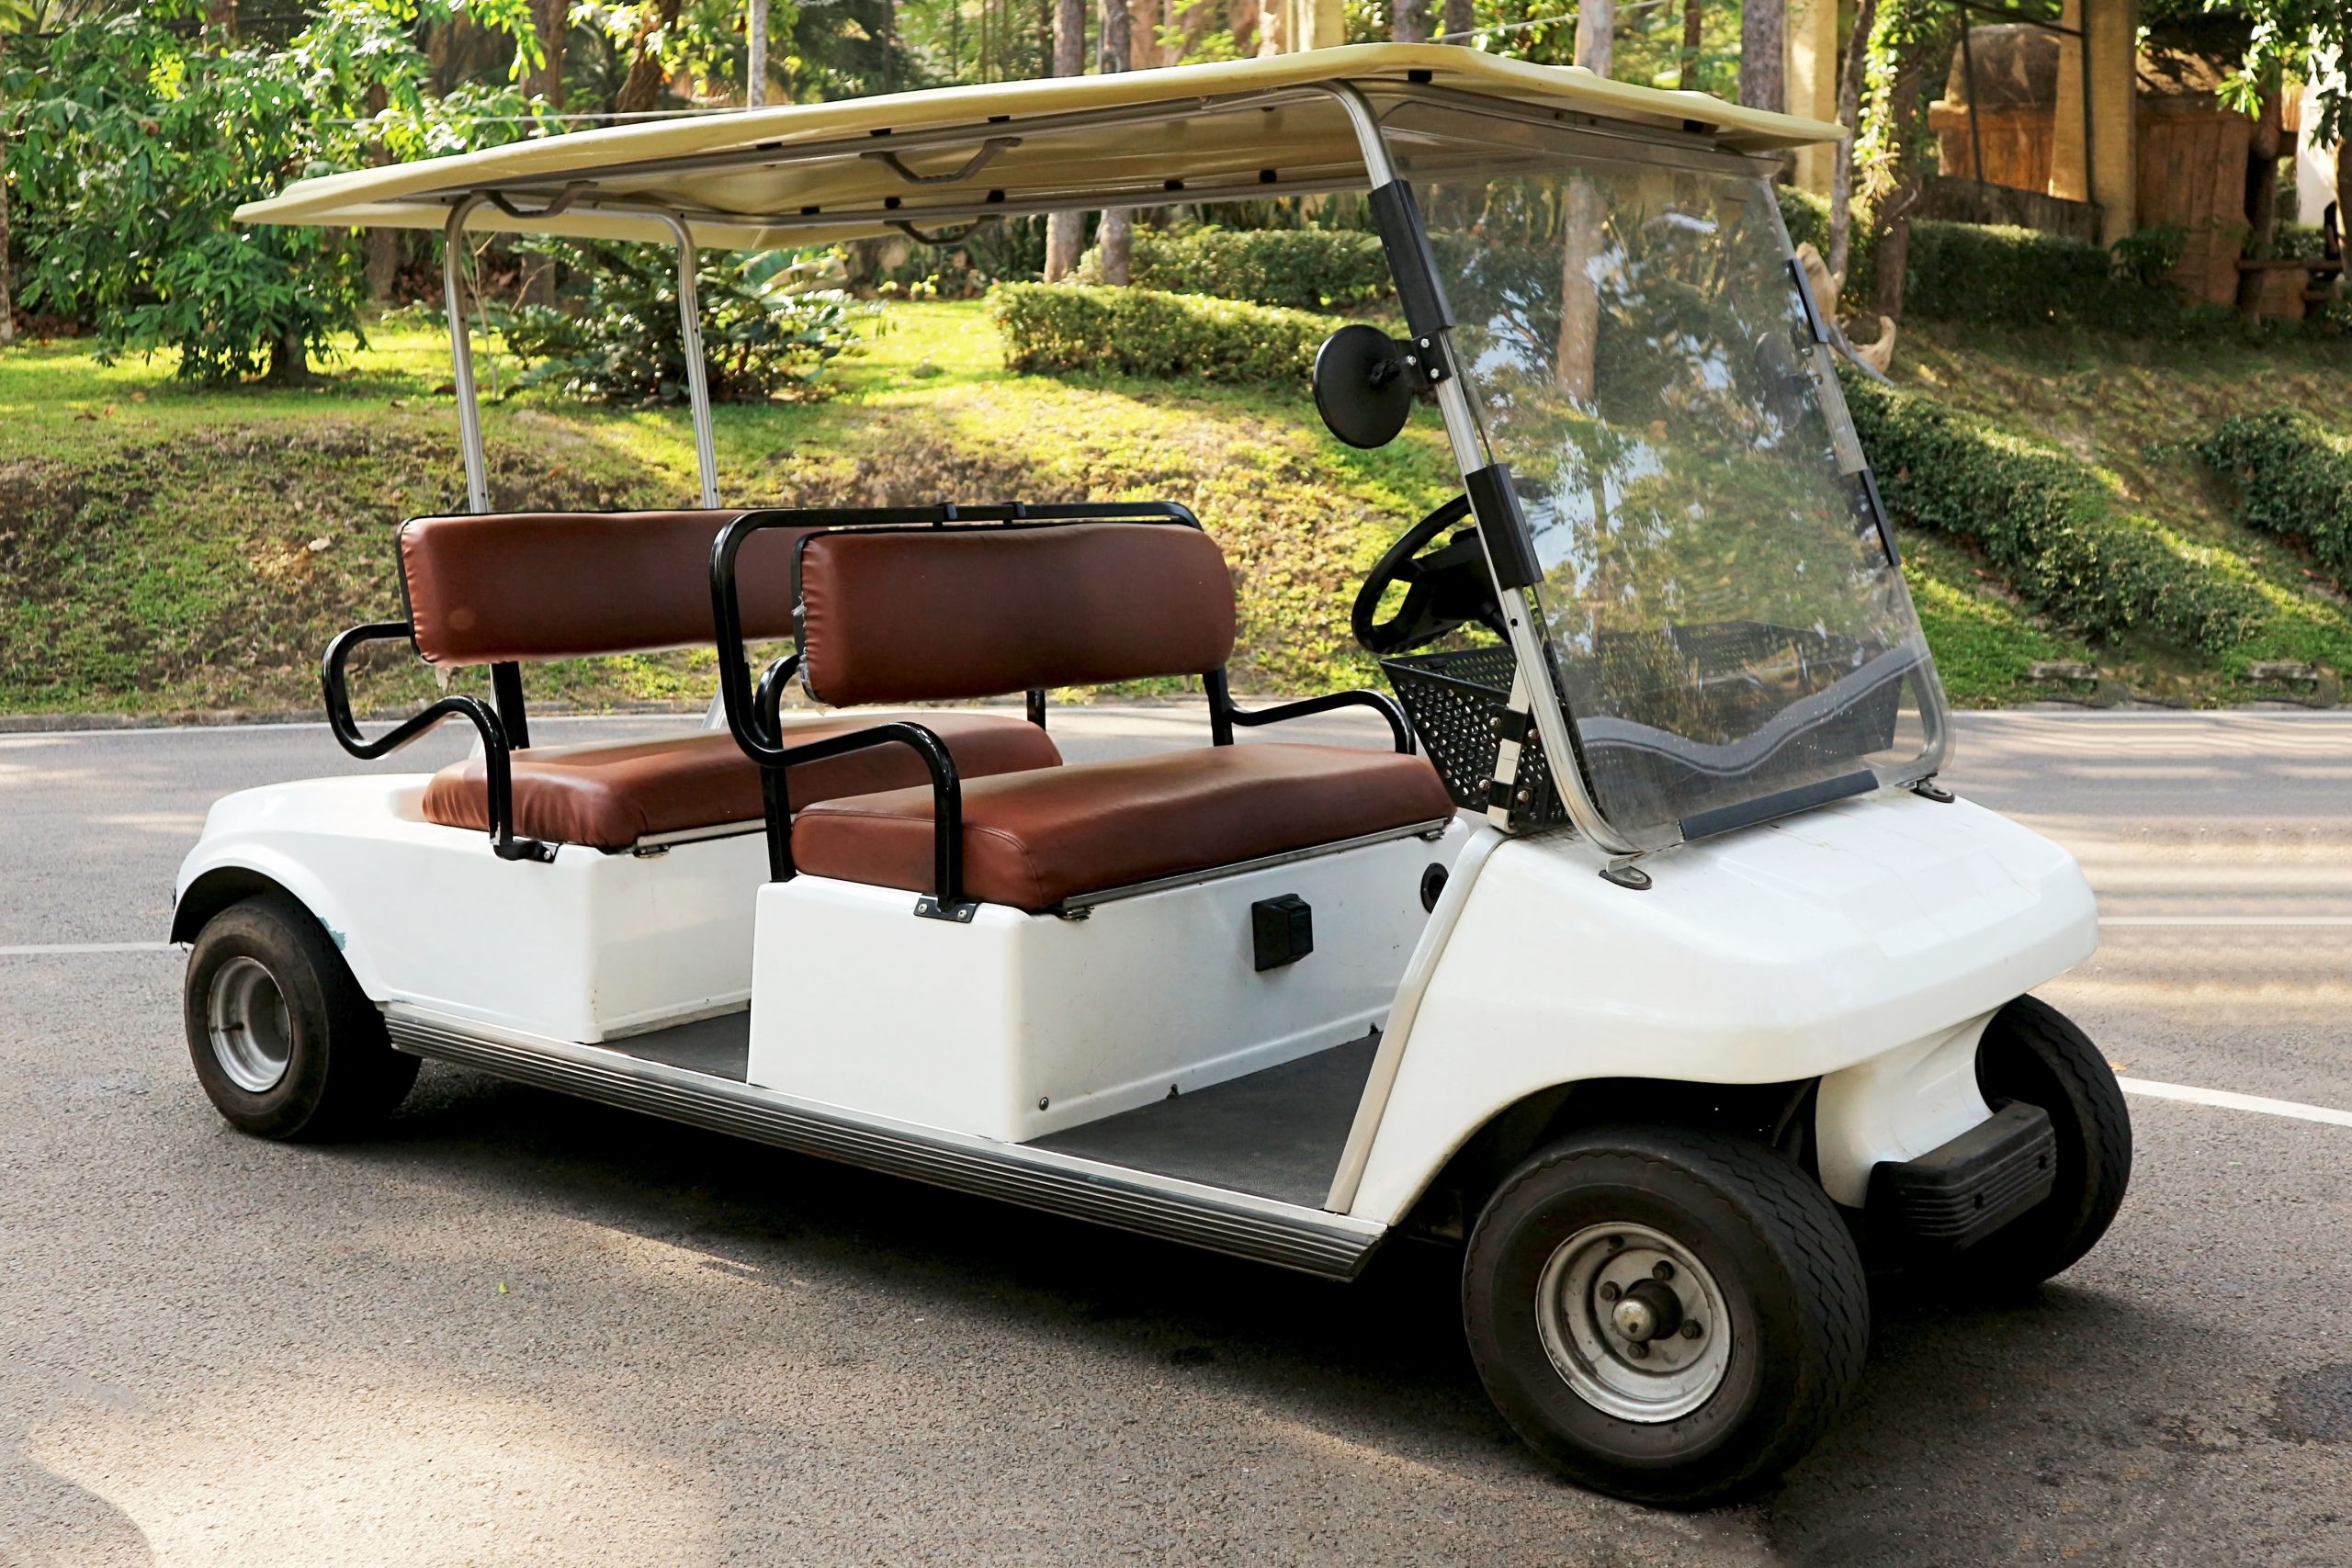 The Rules For Driving Golf Carts on Roads | Texas Heritage for Living